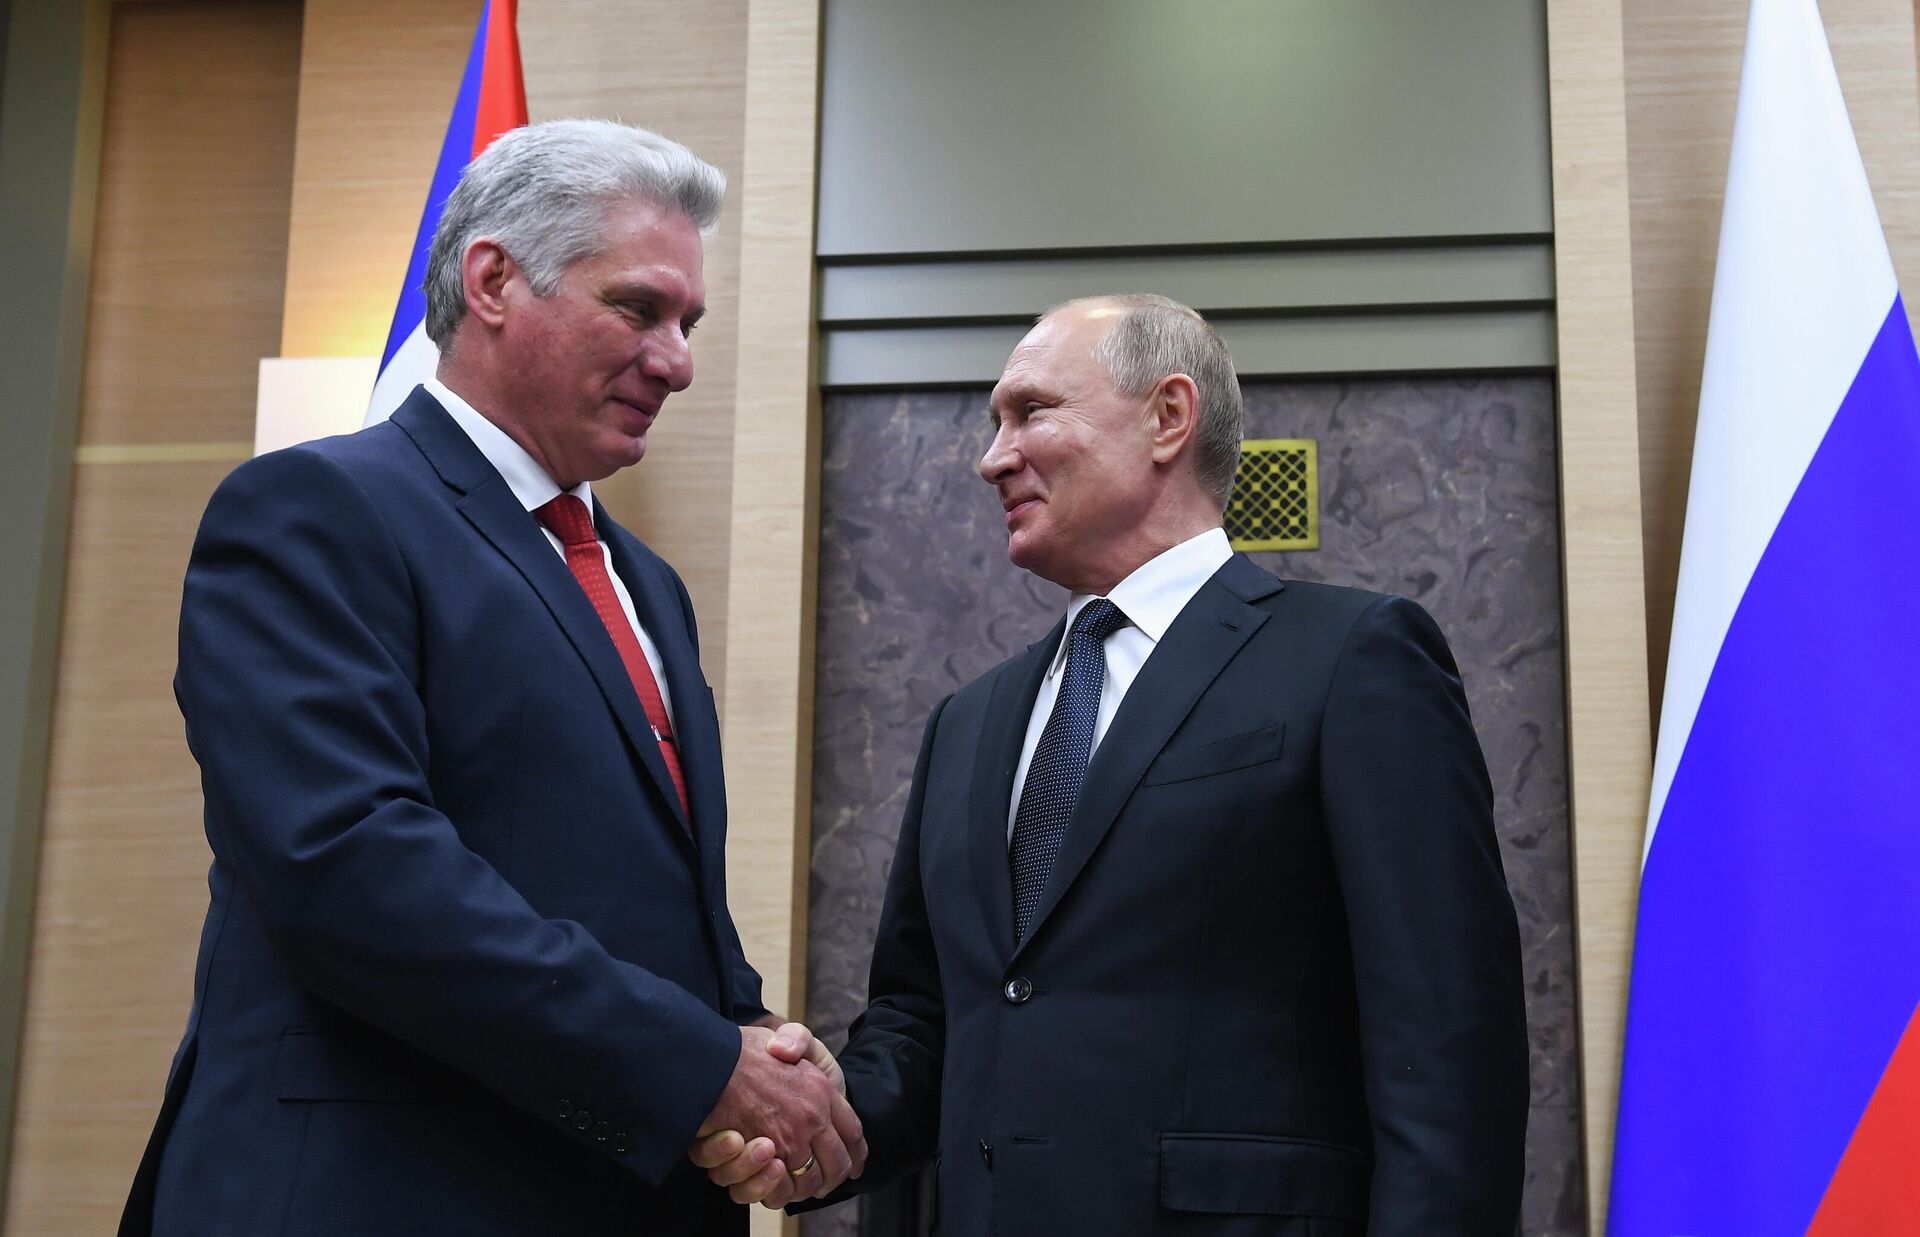 Russian President Vladimir Putin shakes hands with Cuban President Miguel Diaz-Canel during their meeting at Novo-Ogarevo residence, outside Moscow, Russia. - Sputnik International, 1920, 03.01.2022